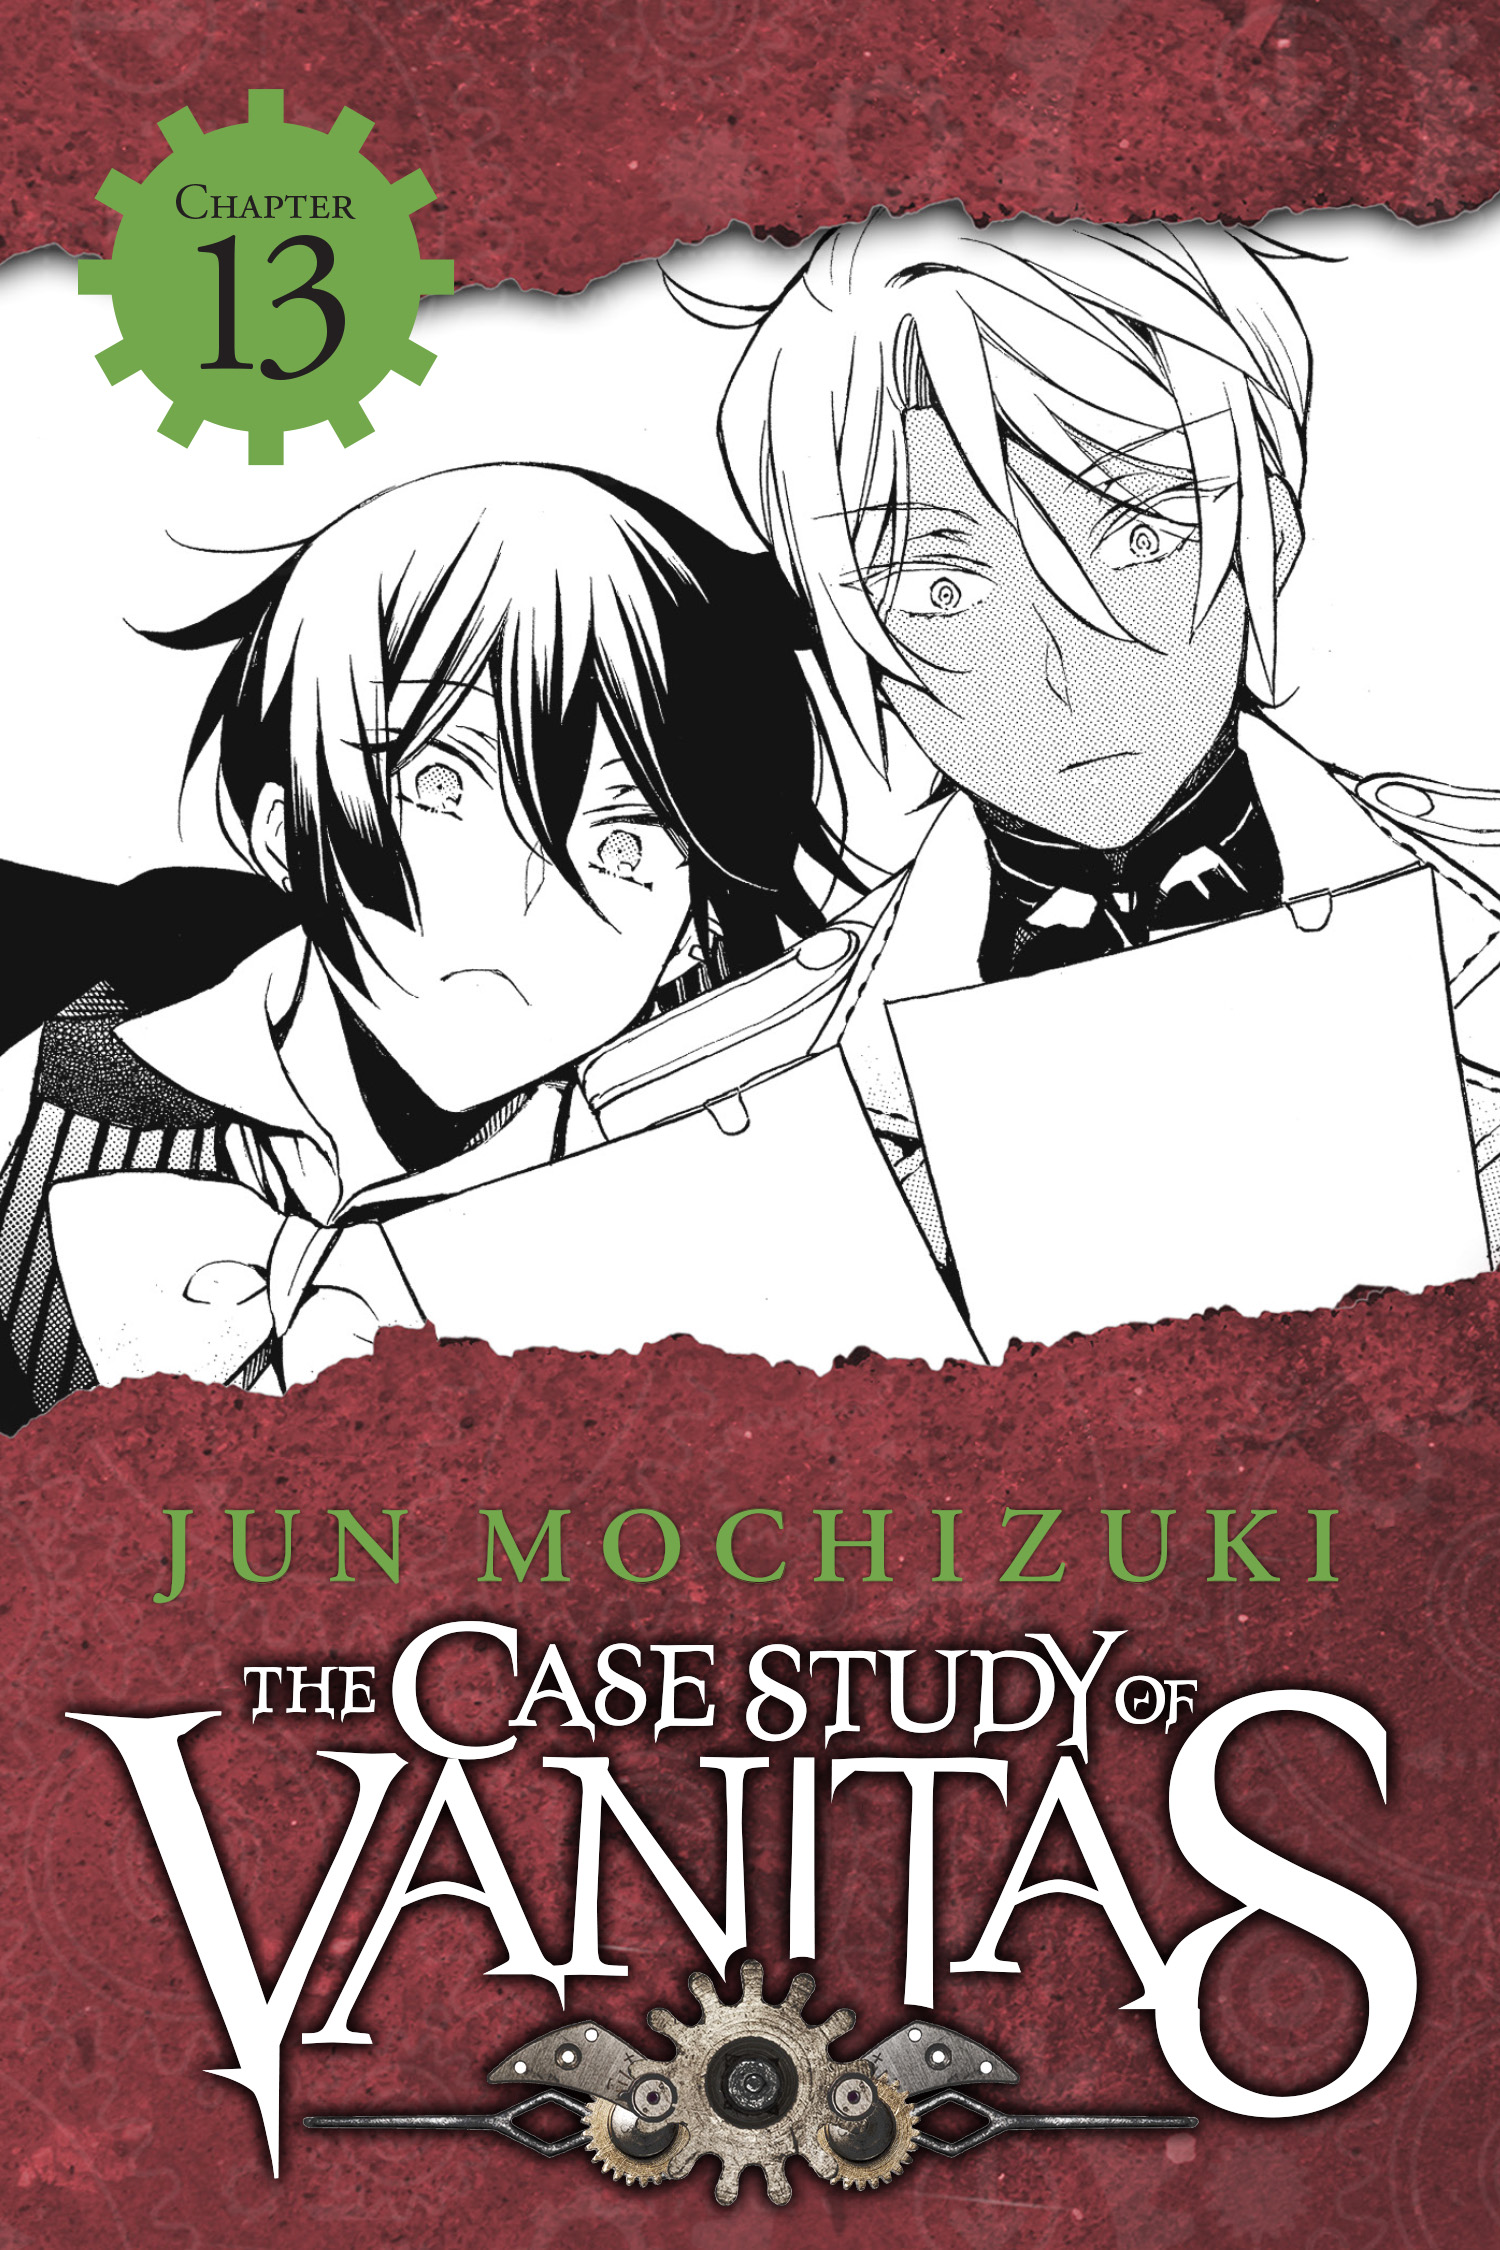 thecasestudyofvanitas_chapter13-copy